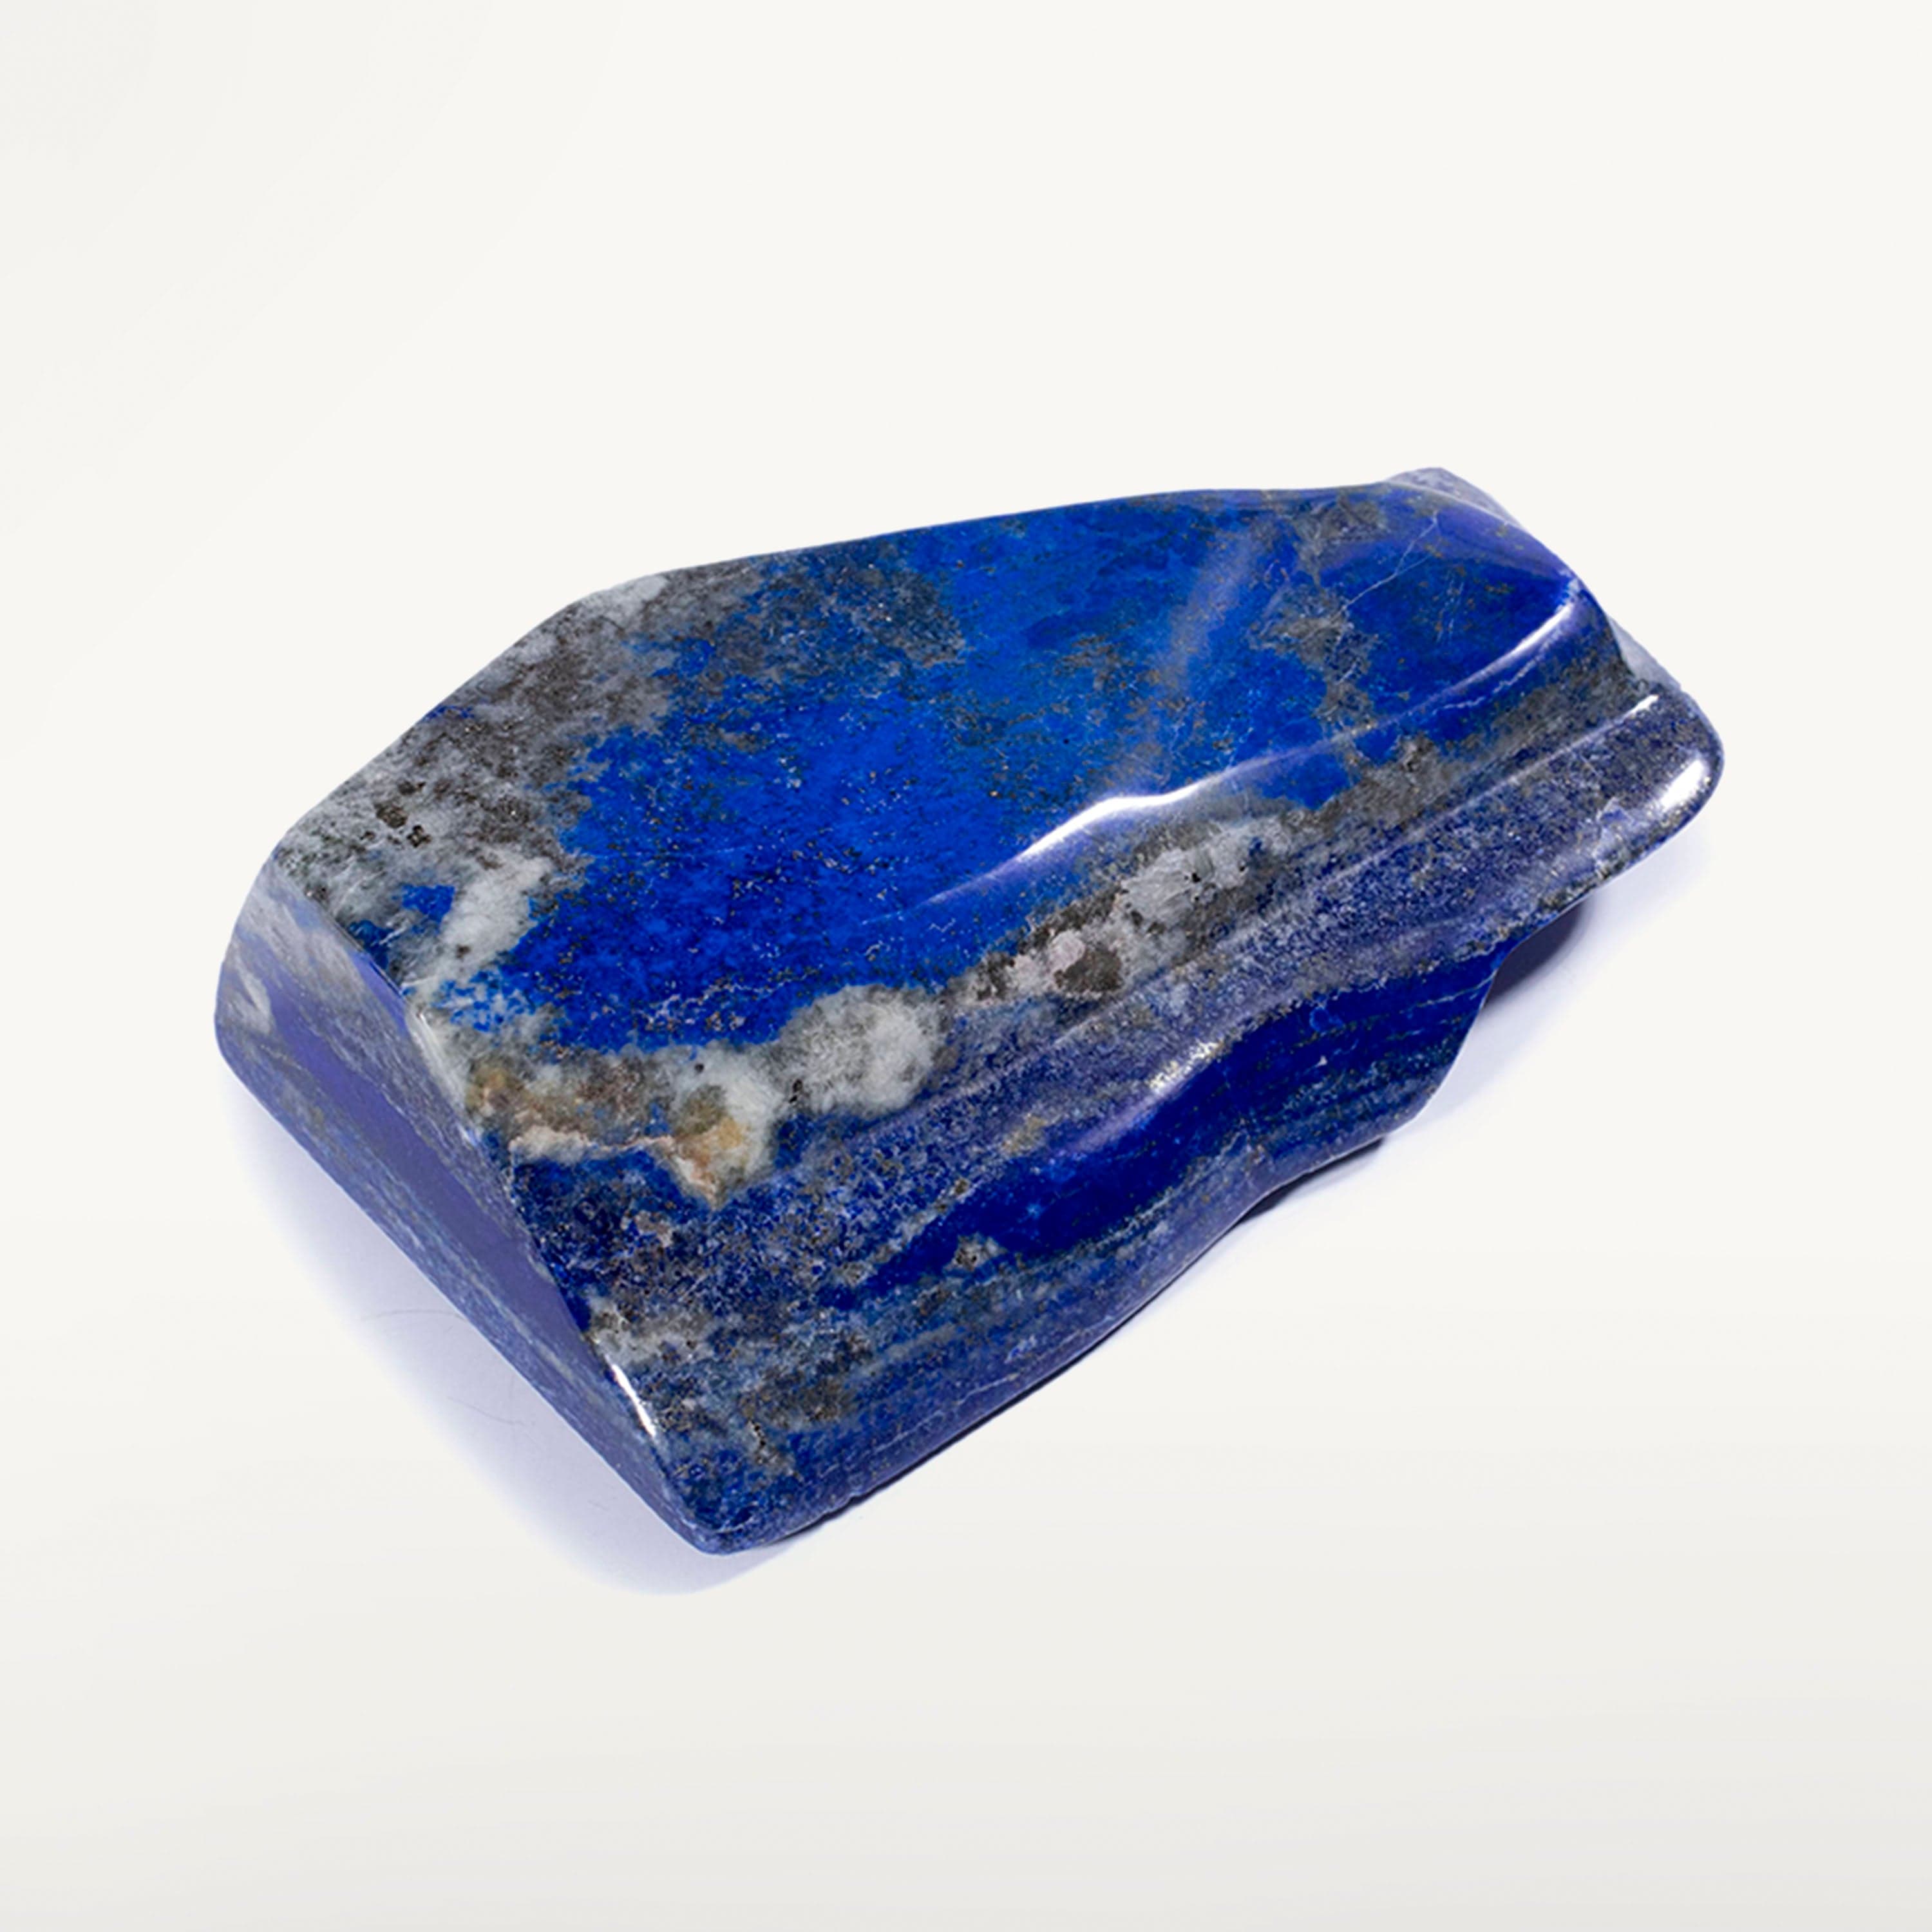 Kalifano Lapis Rare Natural Blue Polished Lapis Lazuli Freeform Carving from Afghanistan - 1460 g / 3.2 lbs LPS1600.002